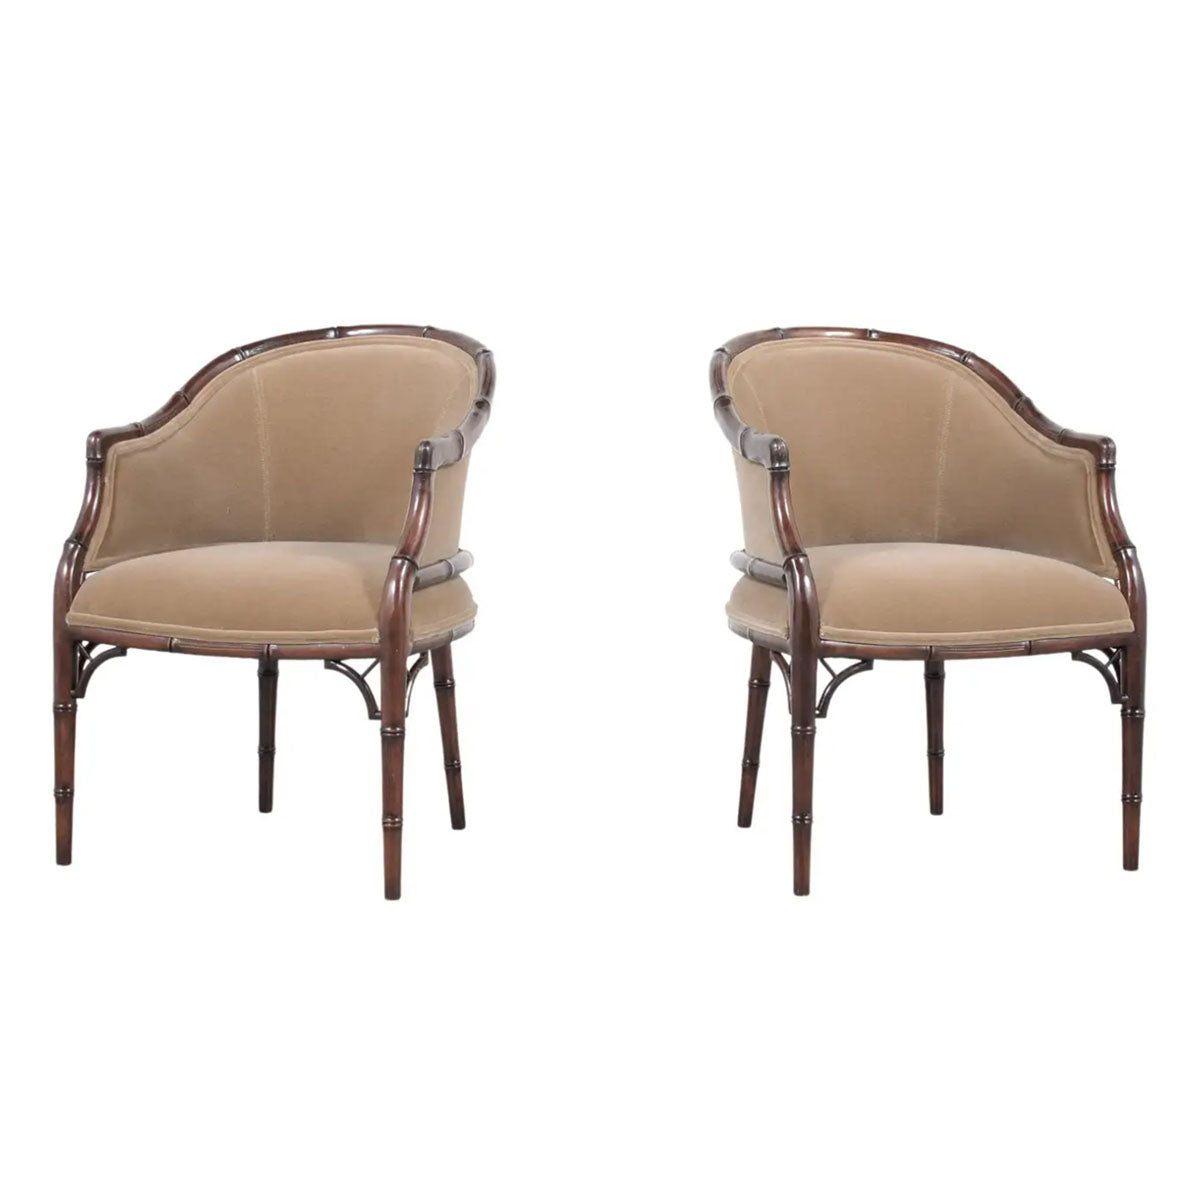 Elegant Vintage Hollywood Regency Armchairs: Bamboo-Carved and Newly Refurbished